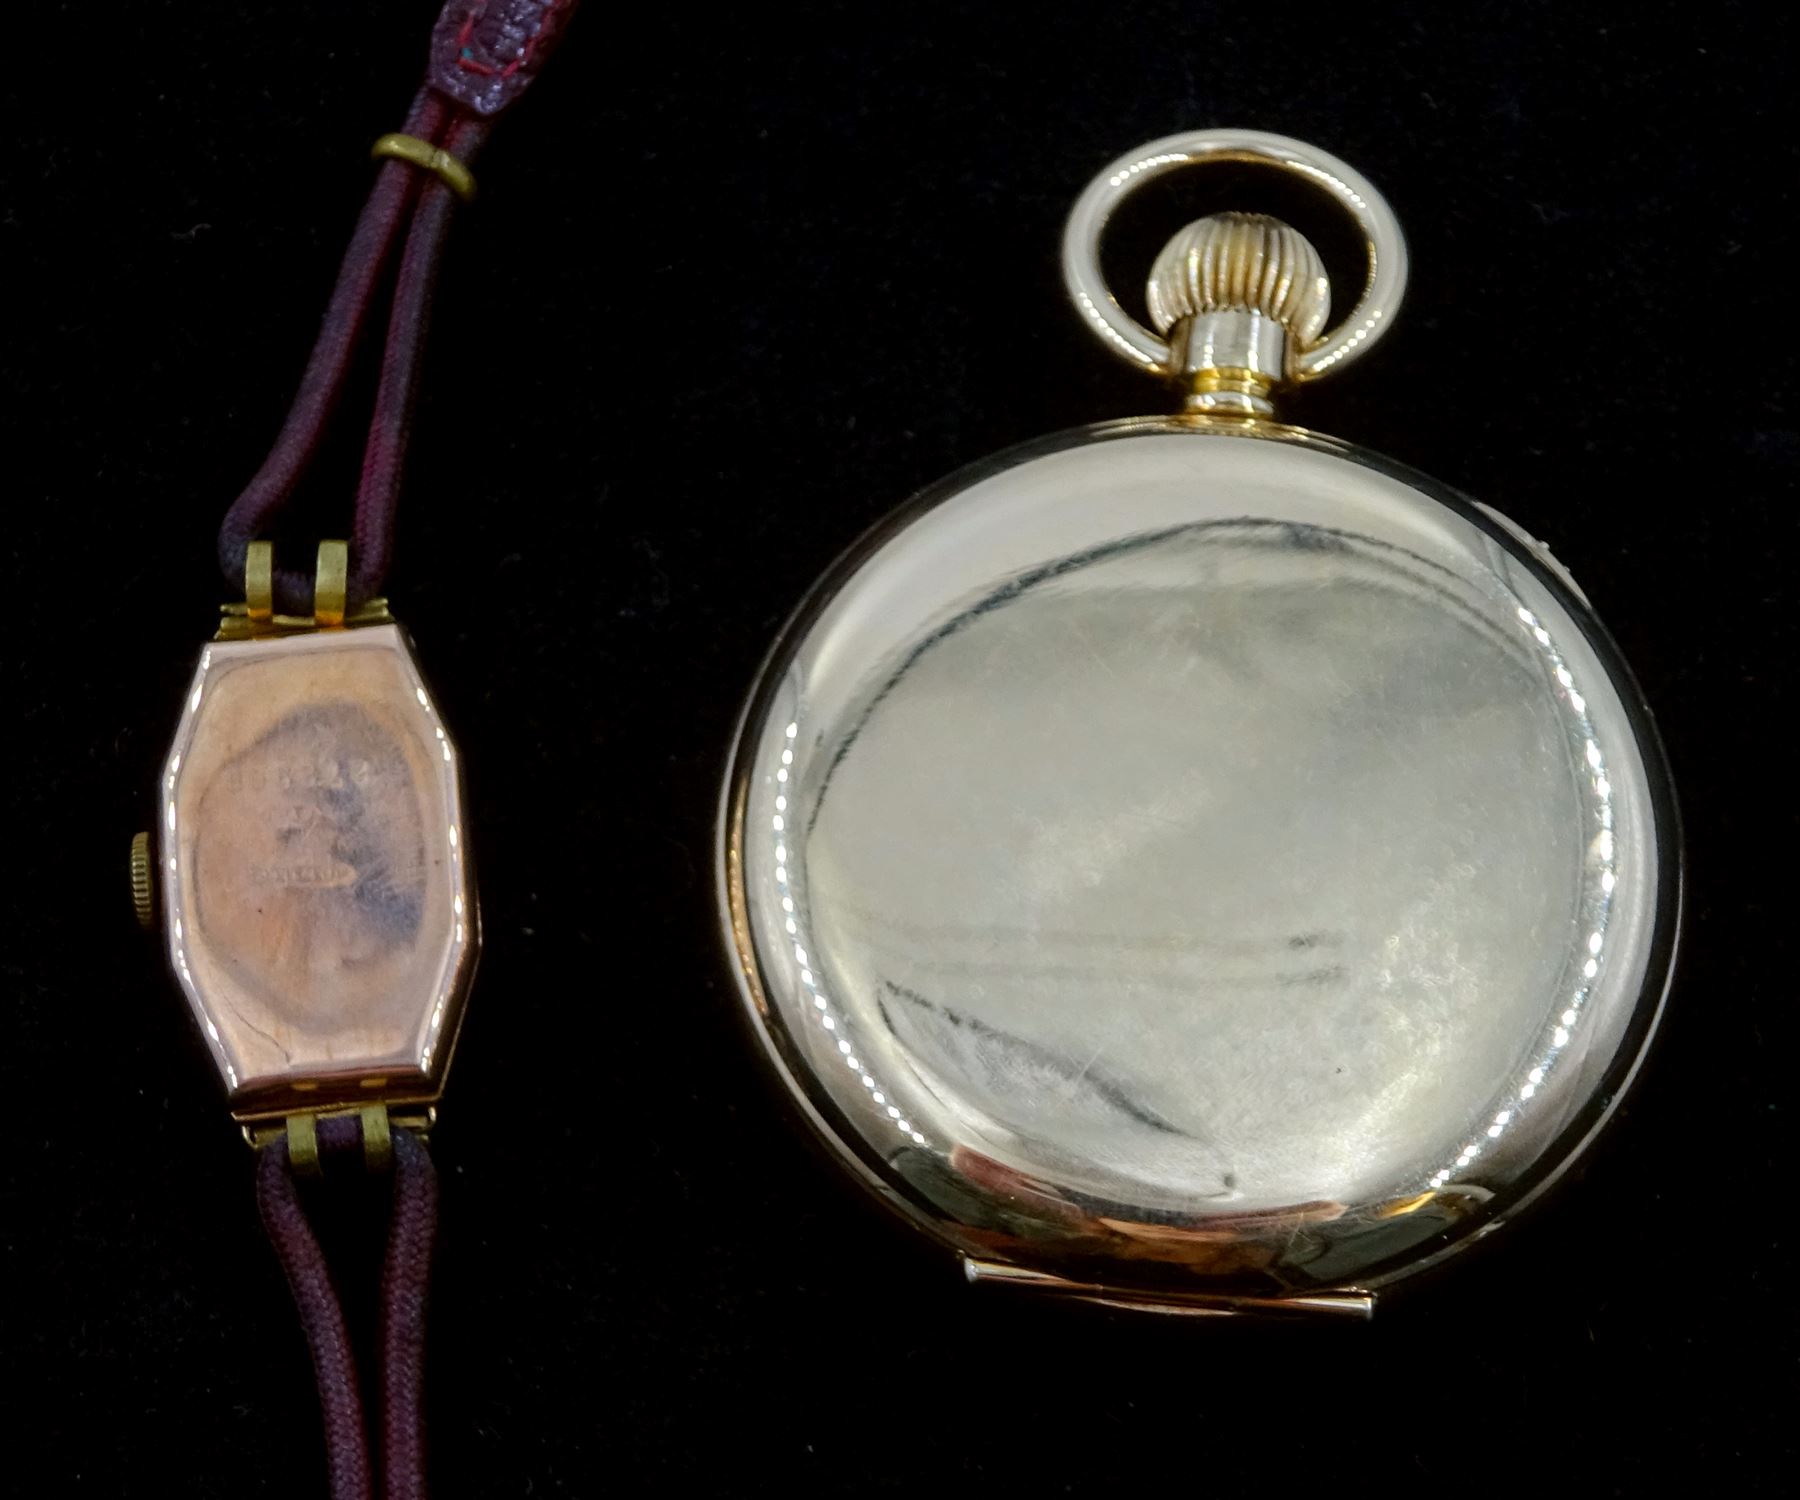 Early 20th century open face gold-plated keyless lever pocket watch by J.W.Benson - Image 2 of 2